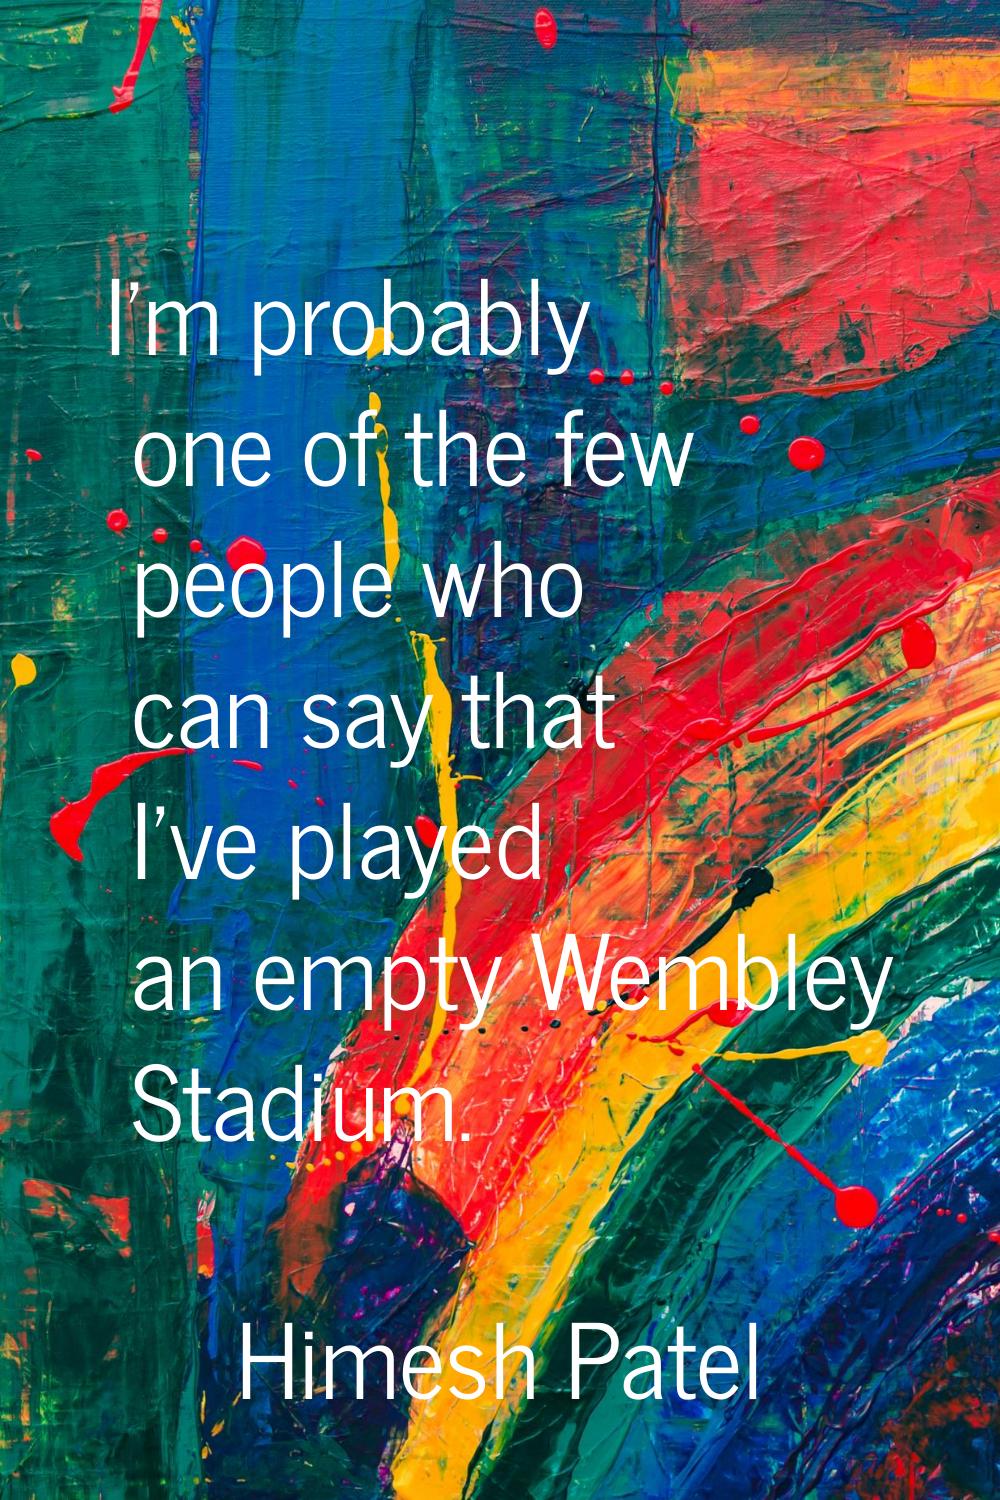 I'm probably one of the few people who can say that I've played an empty Wembley Stadium.